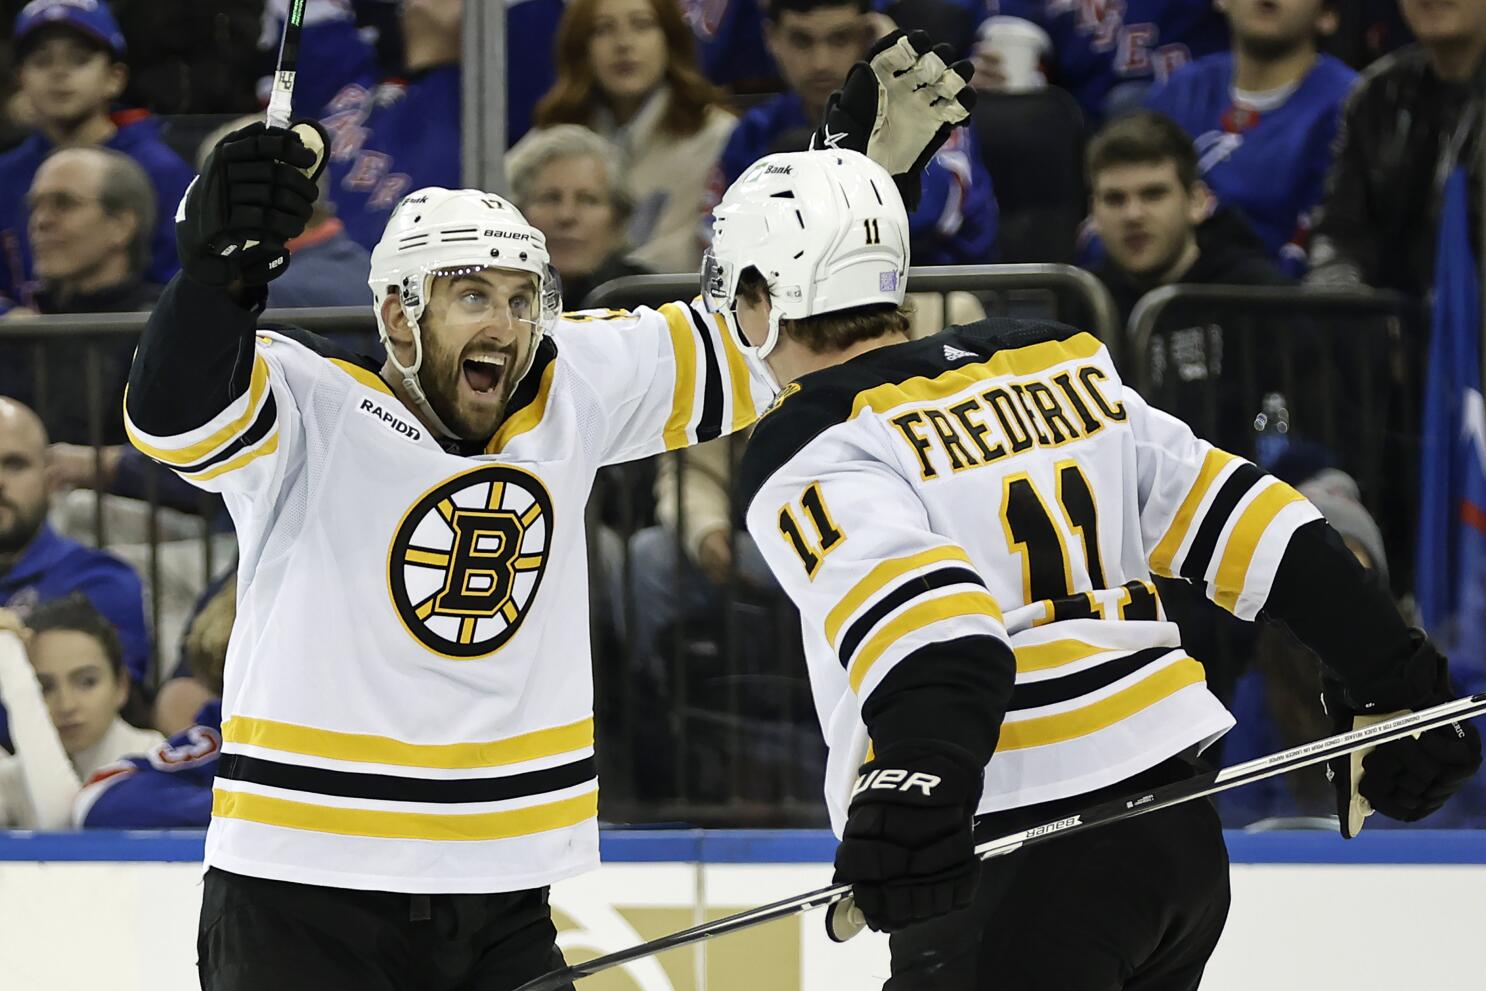 Charlie Coyle of the Boston Bruins is congratulated by Nick Foligno